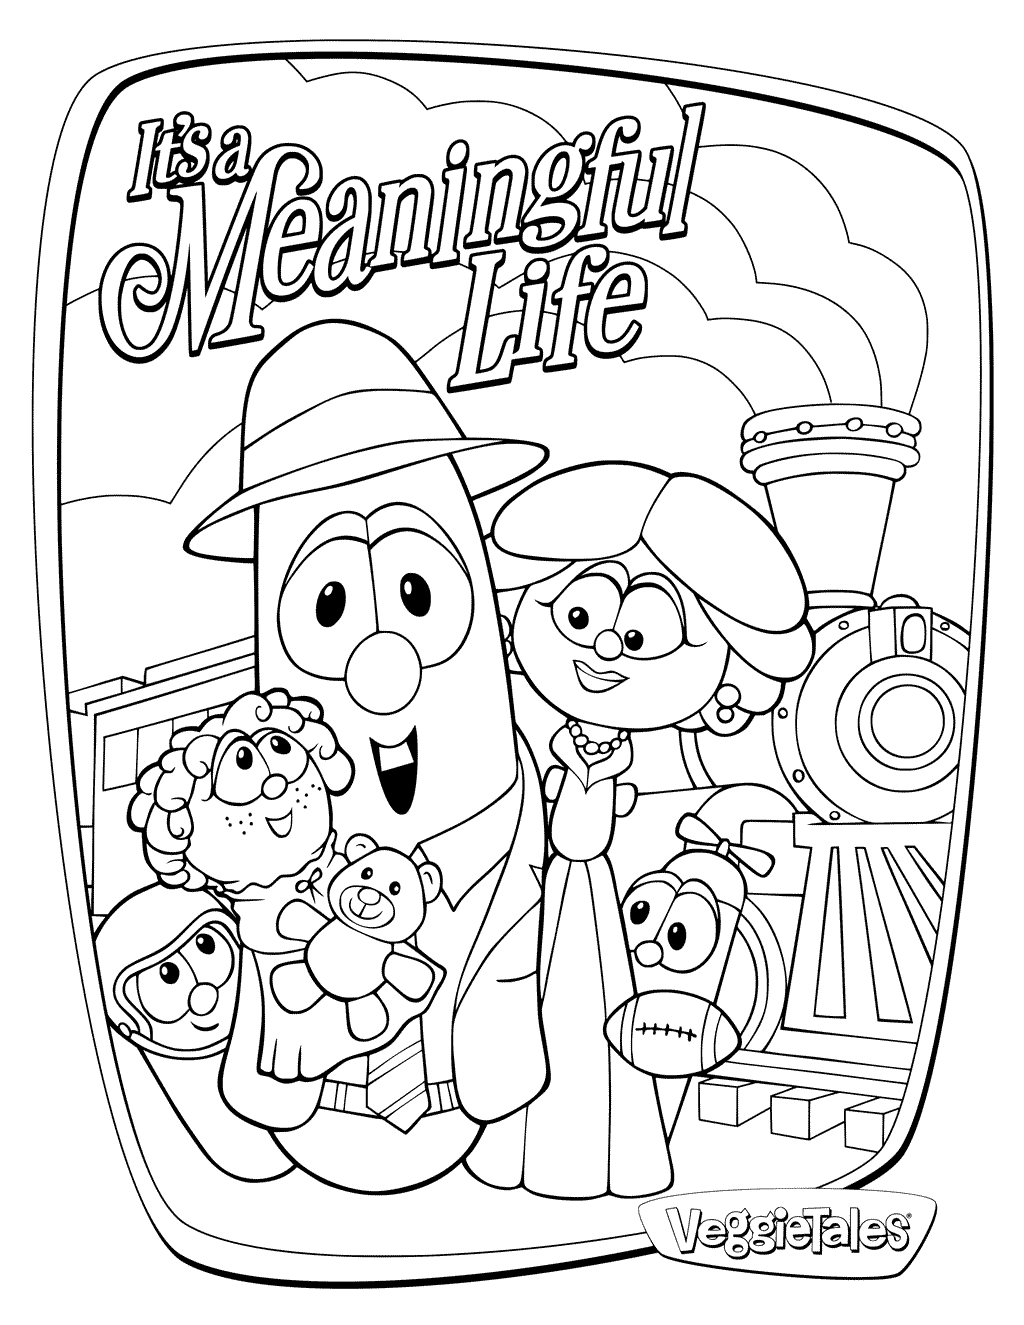 VeggieTales Meaningful Life Coloring Page